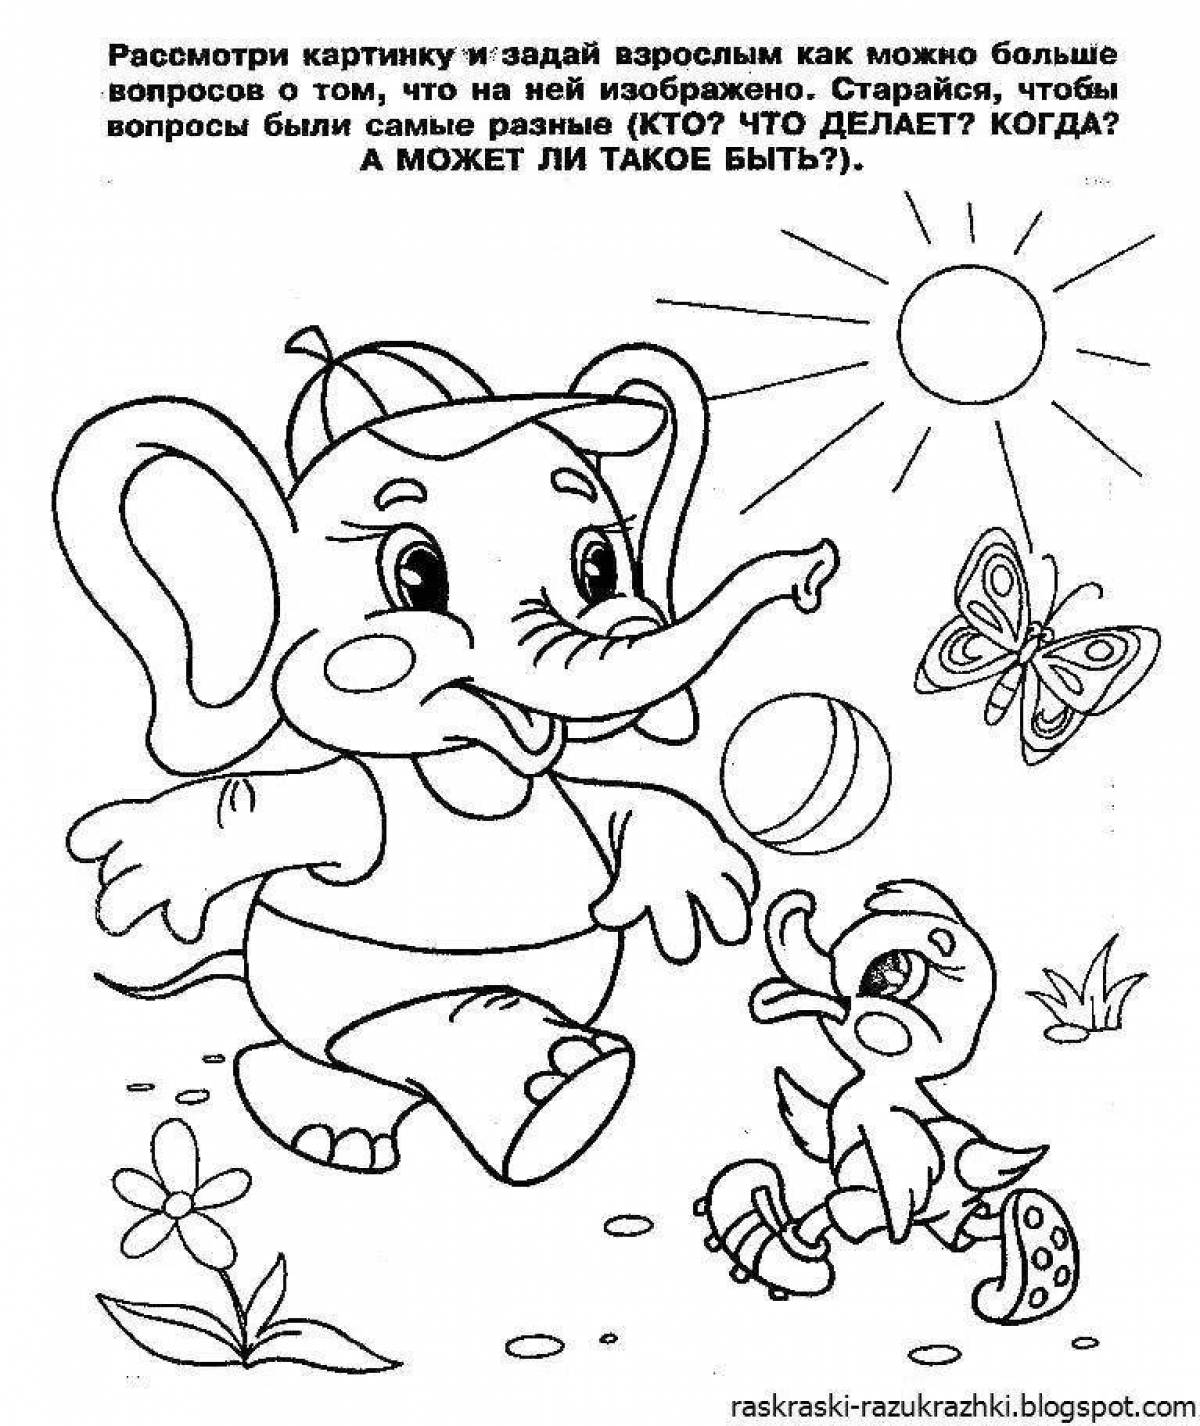 Coloring book for children 5 6 years old #4